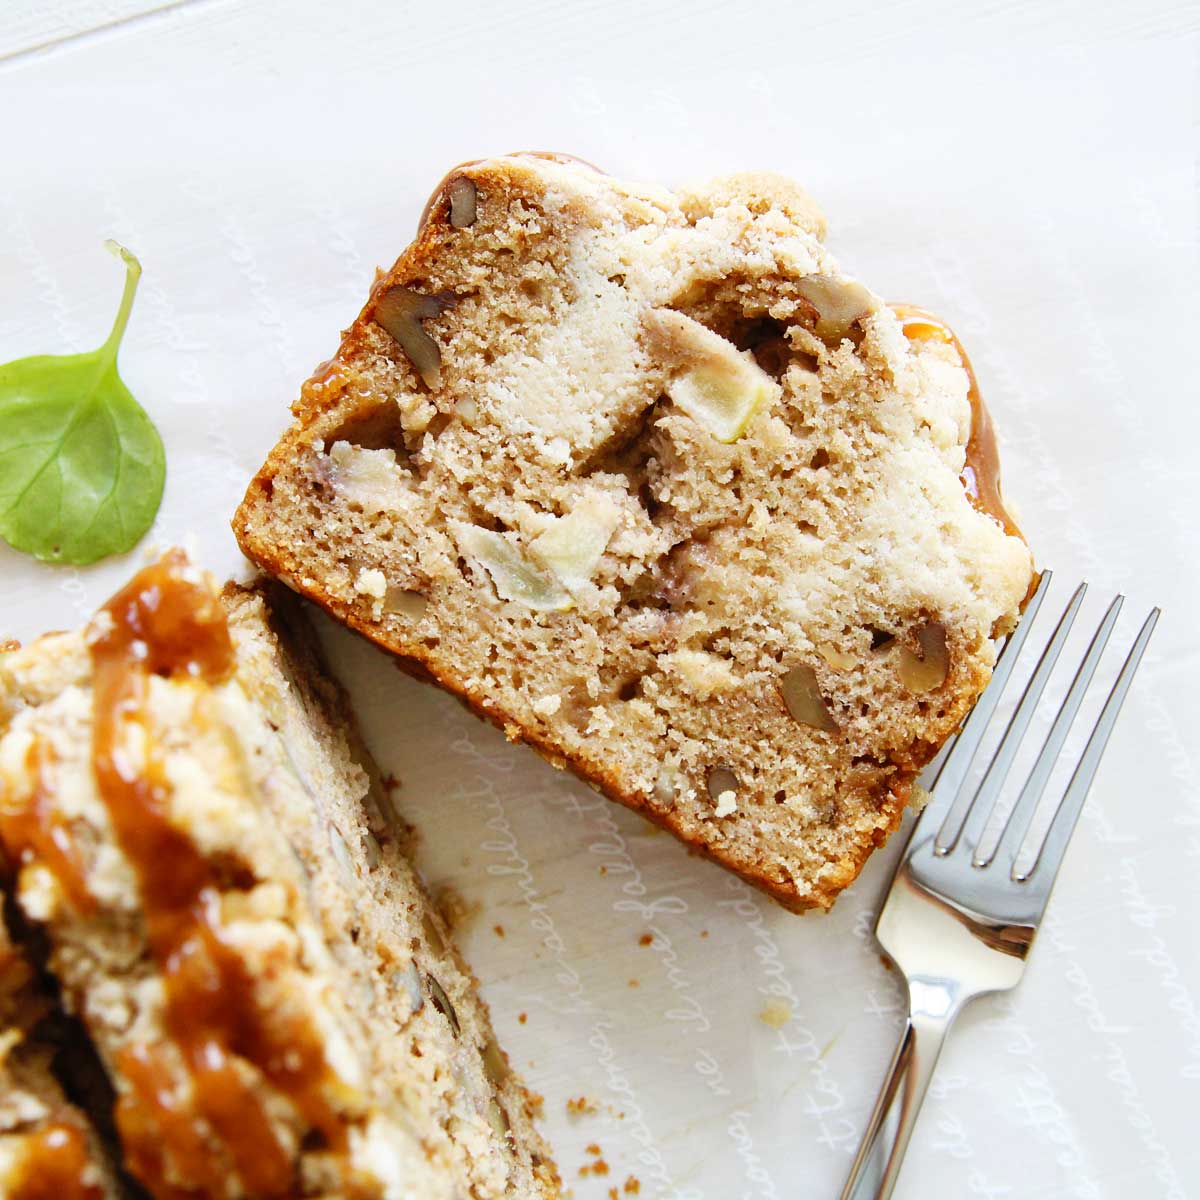 The Most Comforting Applesauce Banana Bread with Streusel Topping - Peppermint Whipped Cream